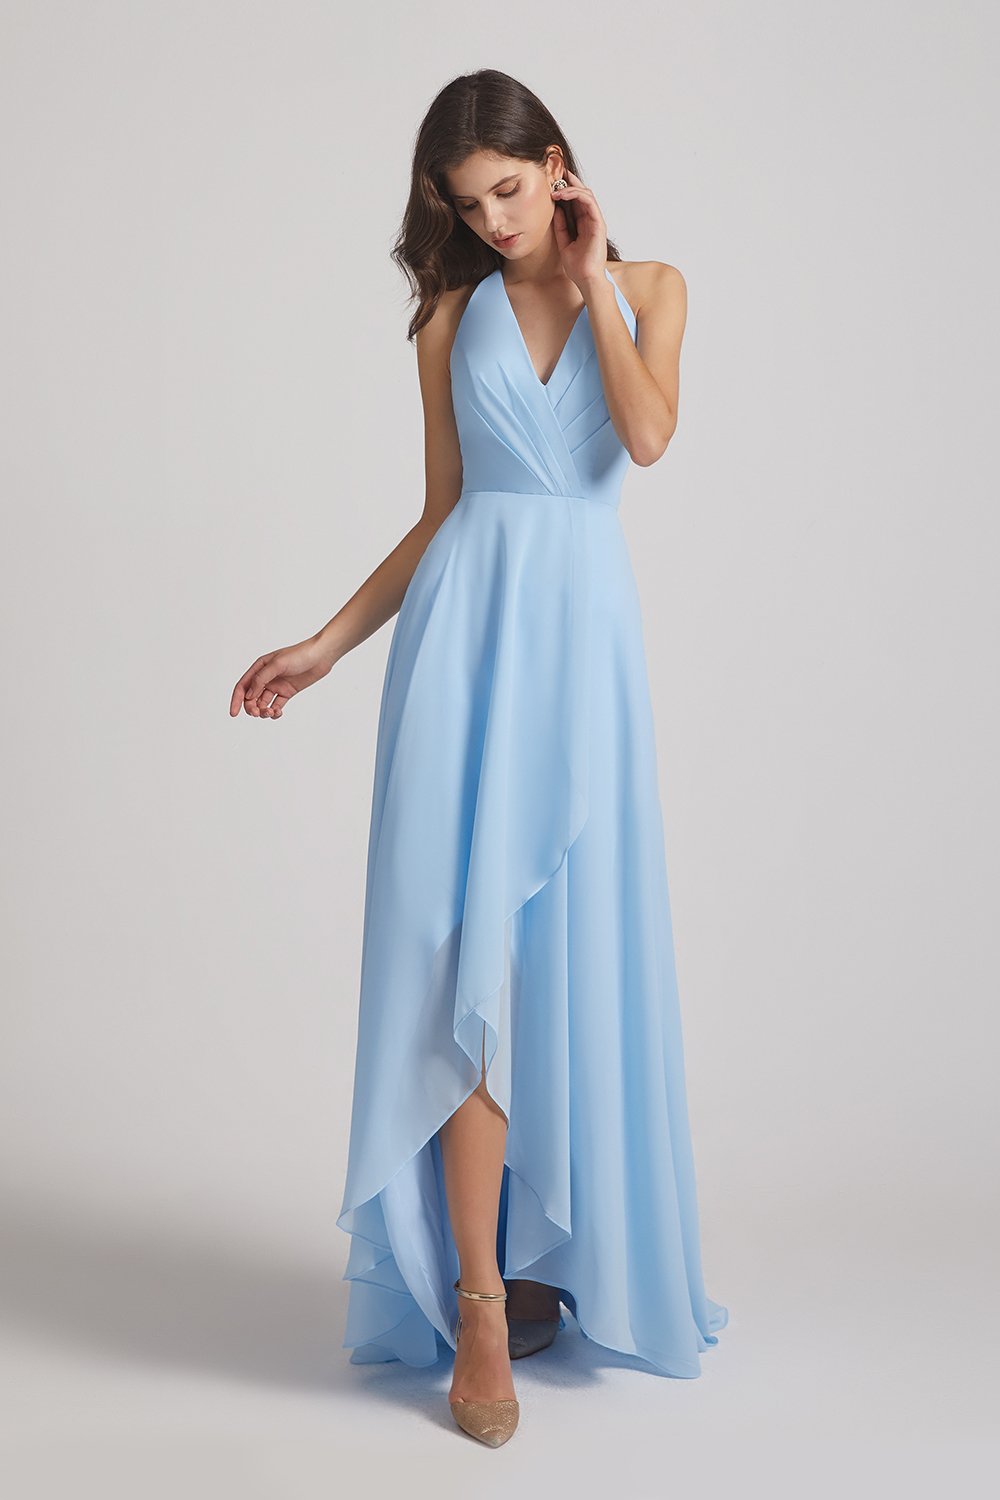 High Low Bridesmaid Dresses - Country Style Gown | Alfabridal ...